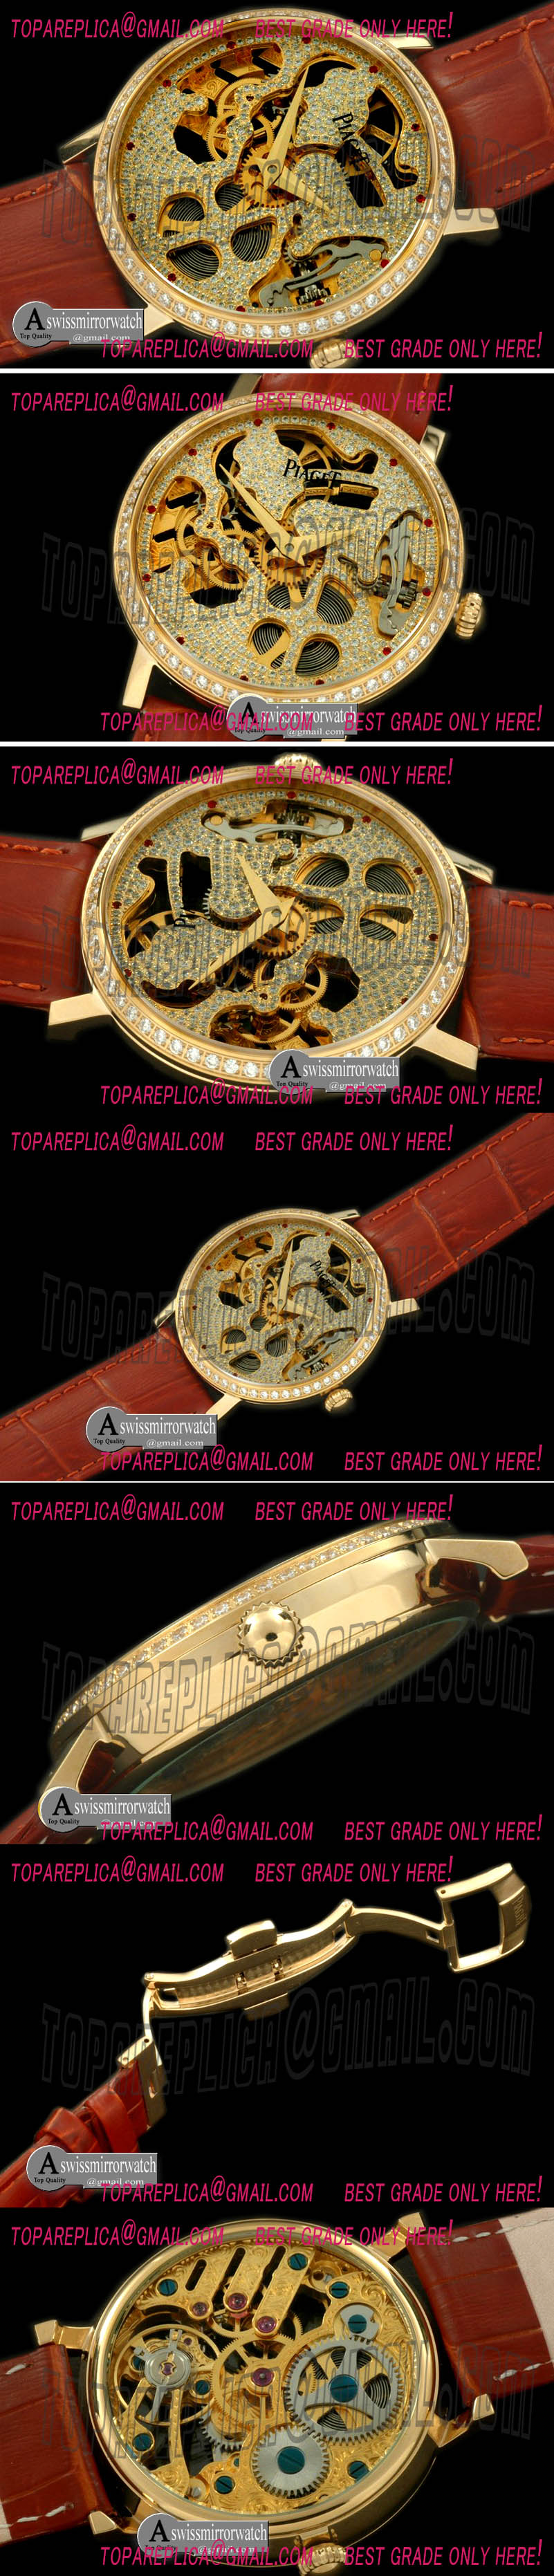 Replica Piaget Watches